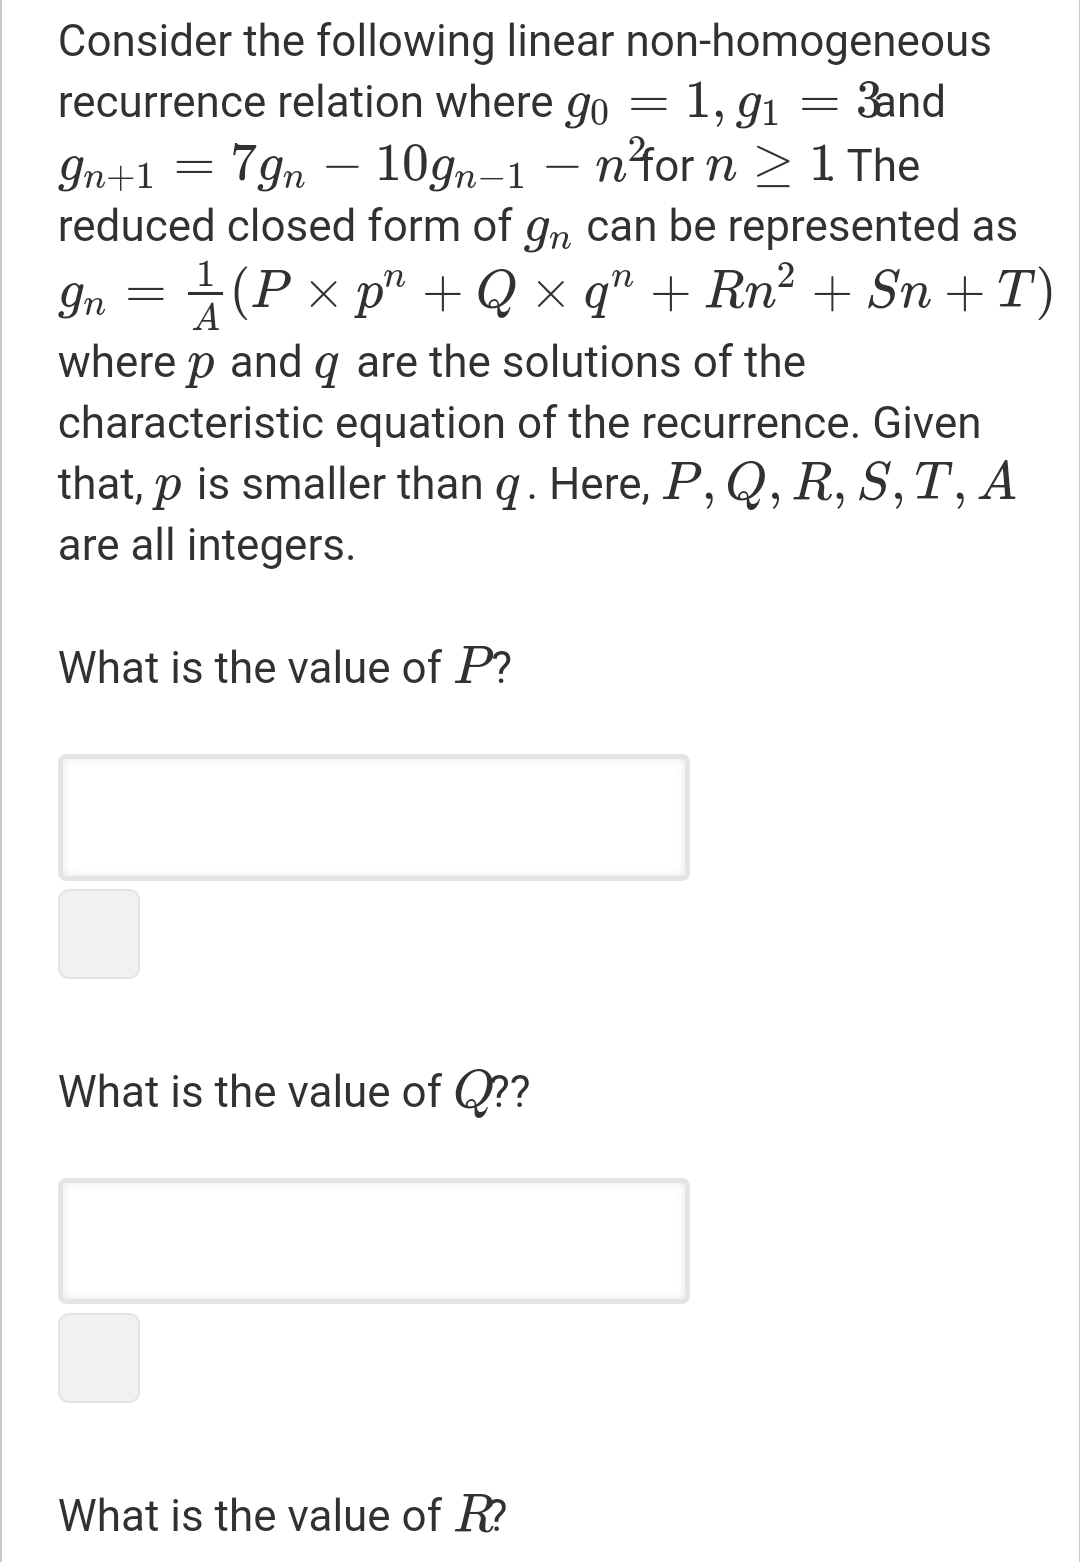 Consider the following linear non-homogeneous
recurrence relation where go = 1, g1 = 3and
In+1
7gn – 10gn-1 –
n'for n >1 The
reduced closed form of gn can be represented as
1
In
P x p" + Q x q" + Rn² + Sn +T)
A
where p and q are the solutions of the
characteristic equation of the recurrence. Given
that, p is smaller than q. Here, P, Q, R, S,T, A
are all integers.
What is the value of P?
What is the value of Q??
What is the value of R?
